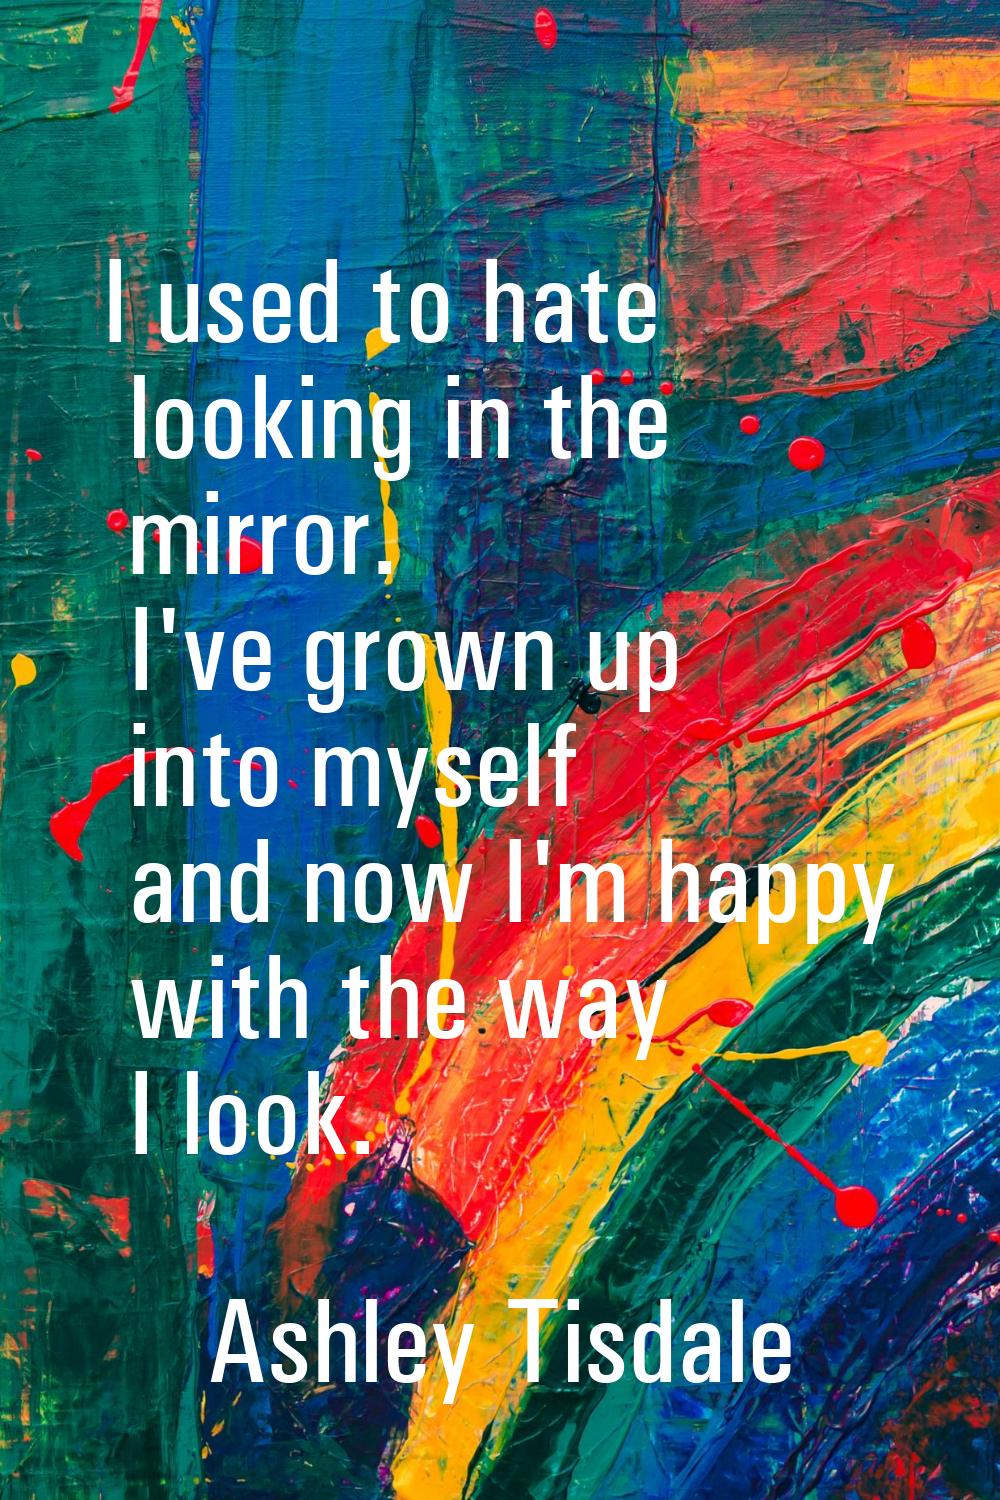 I used to hate looking in the mirror. I've grown up into myself and now I'm happy with the way I lo